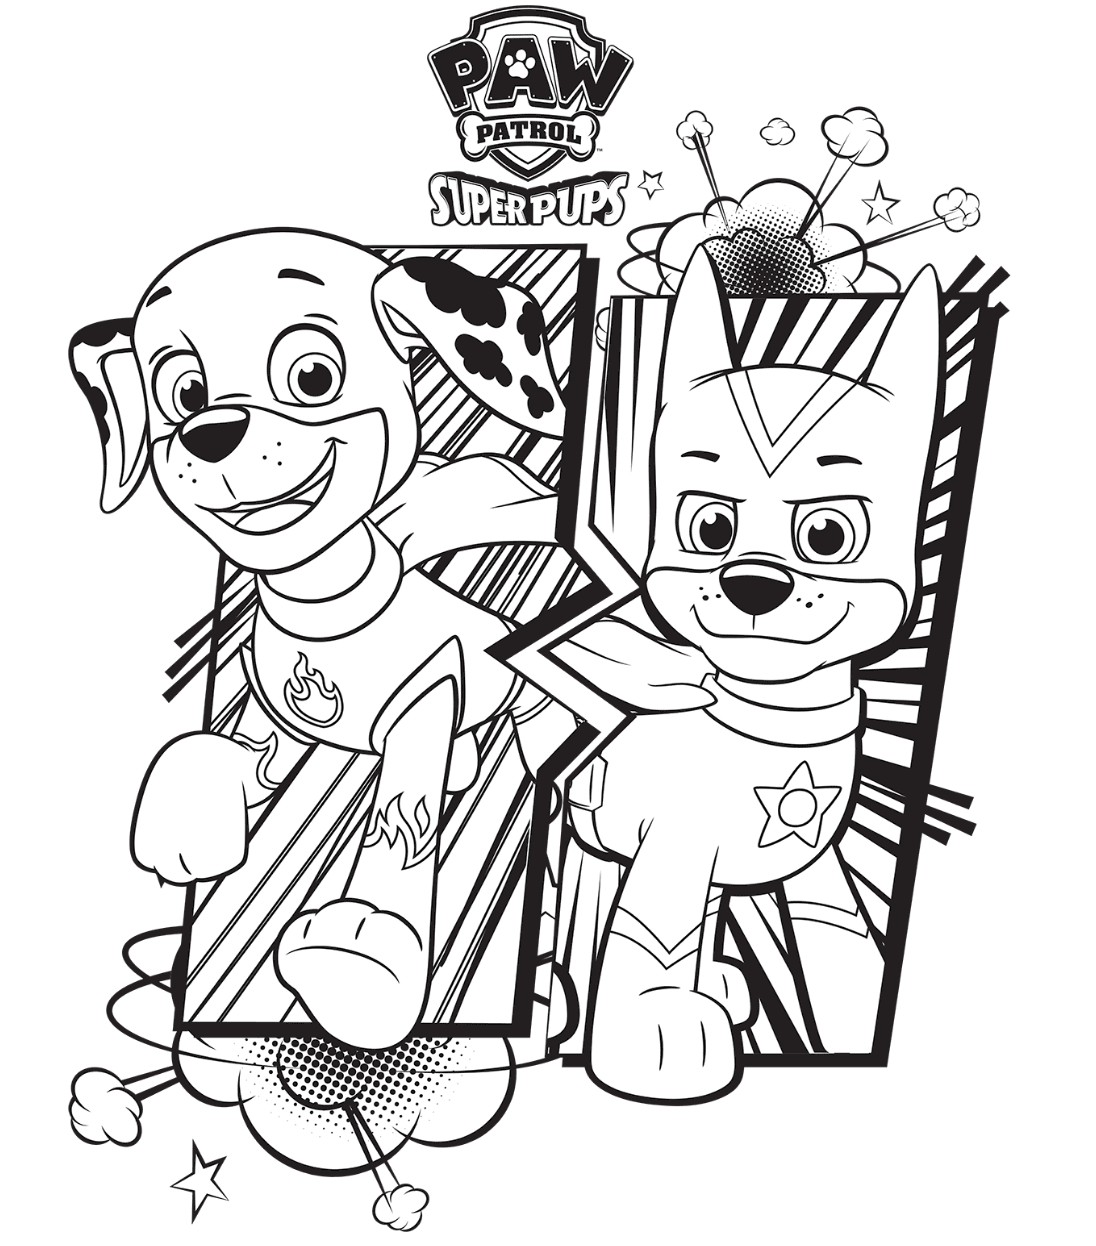  Paw Patrol Coloring Pages For Kids for Adult